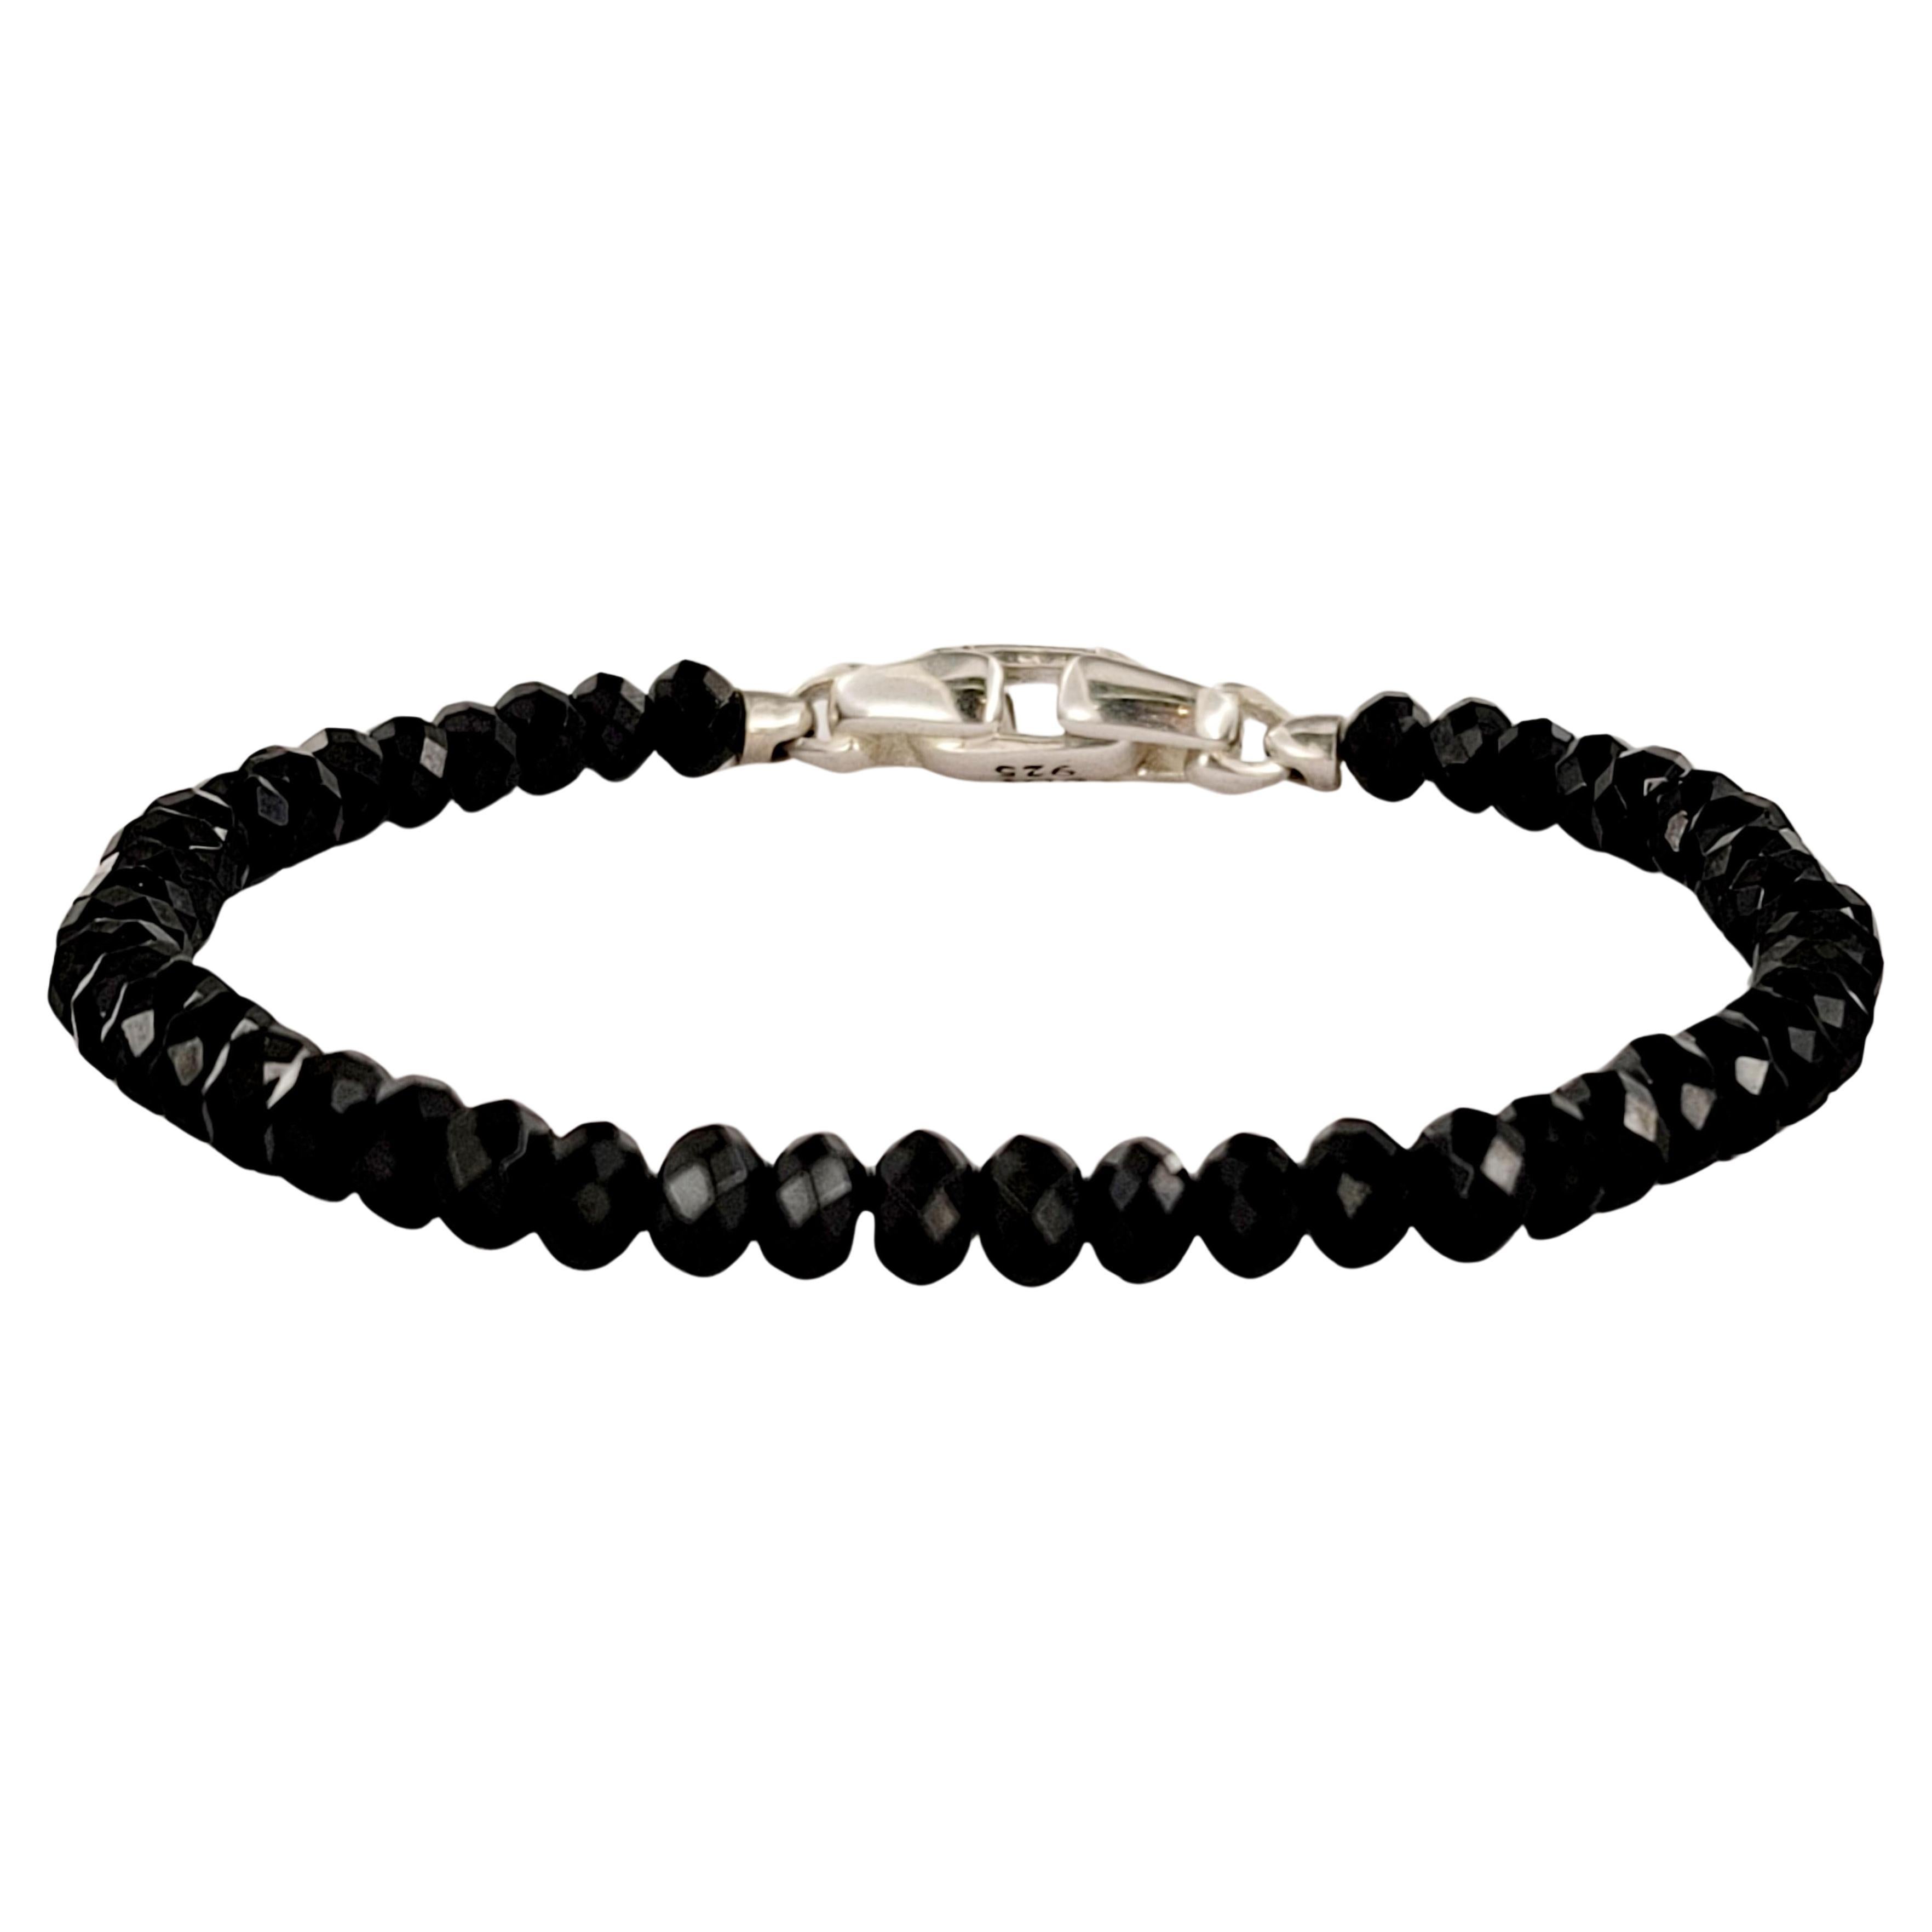 Spiritual Beads Faceted Bracelet Sterling Silver with Black Spinel, 5mm